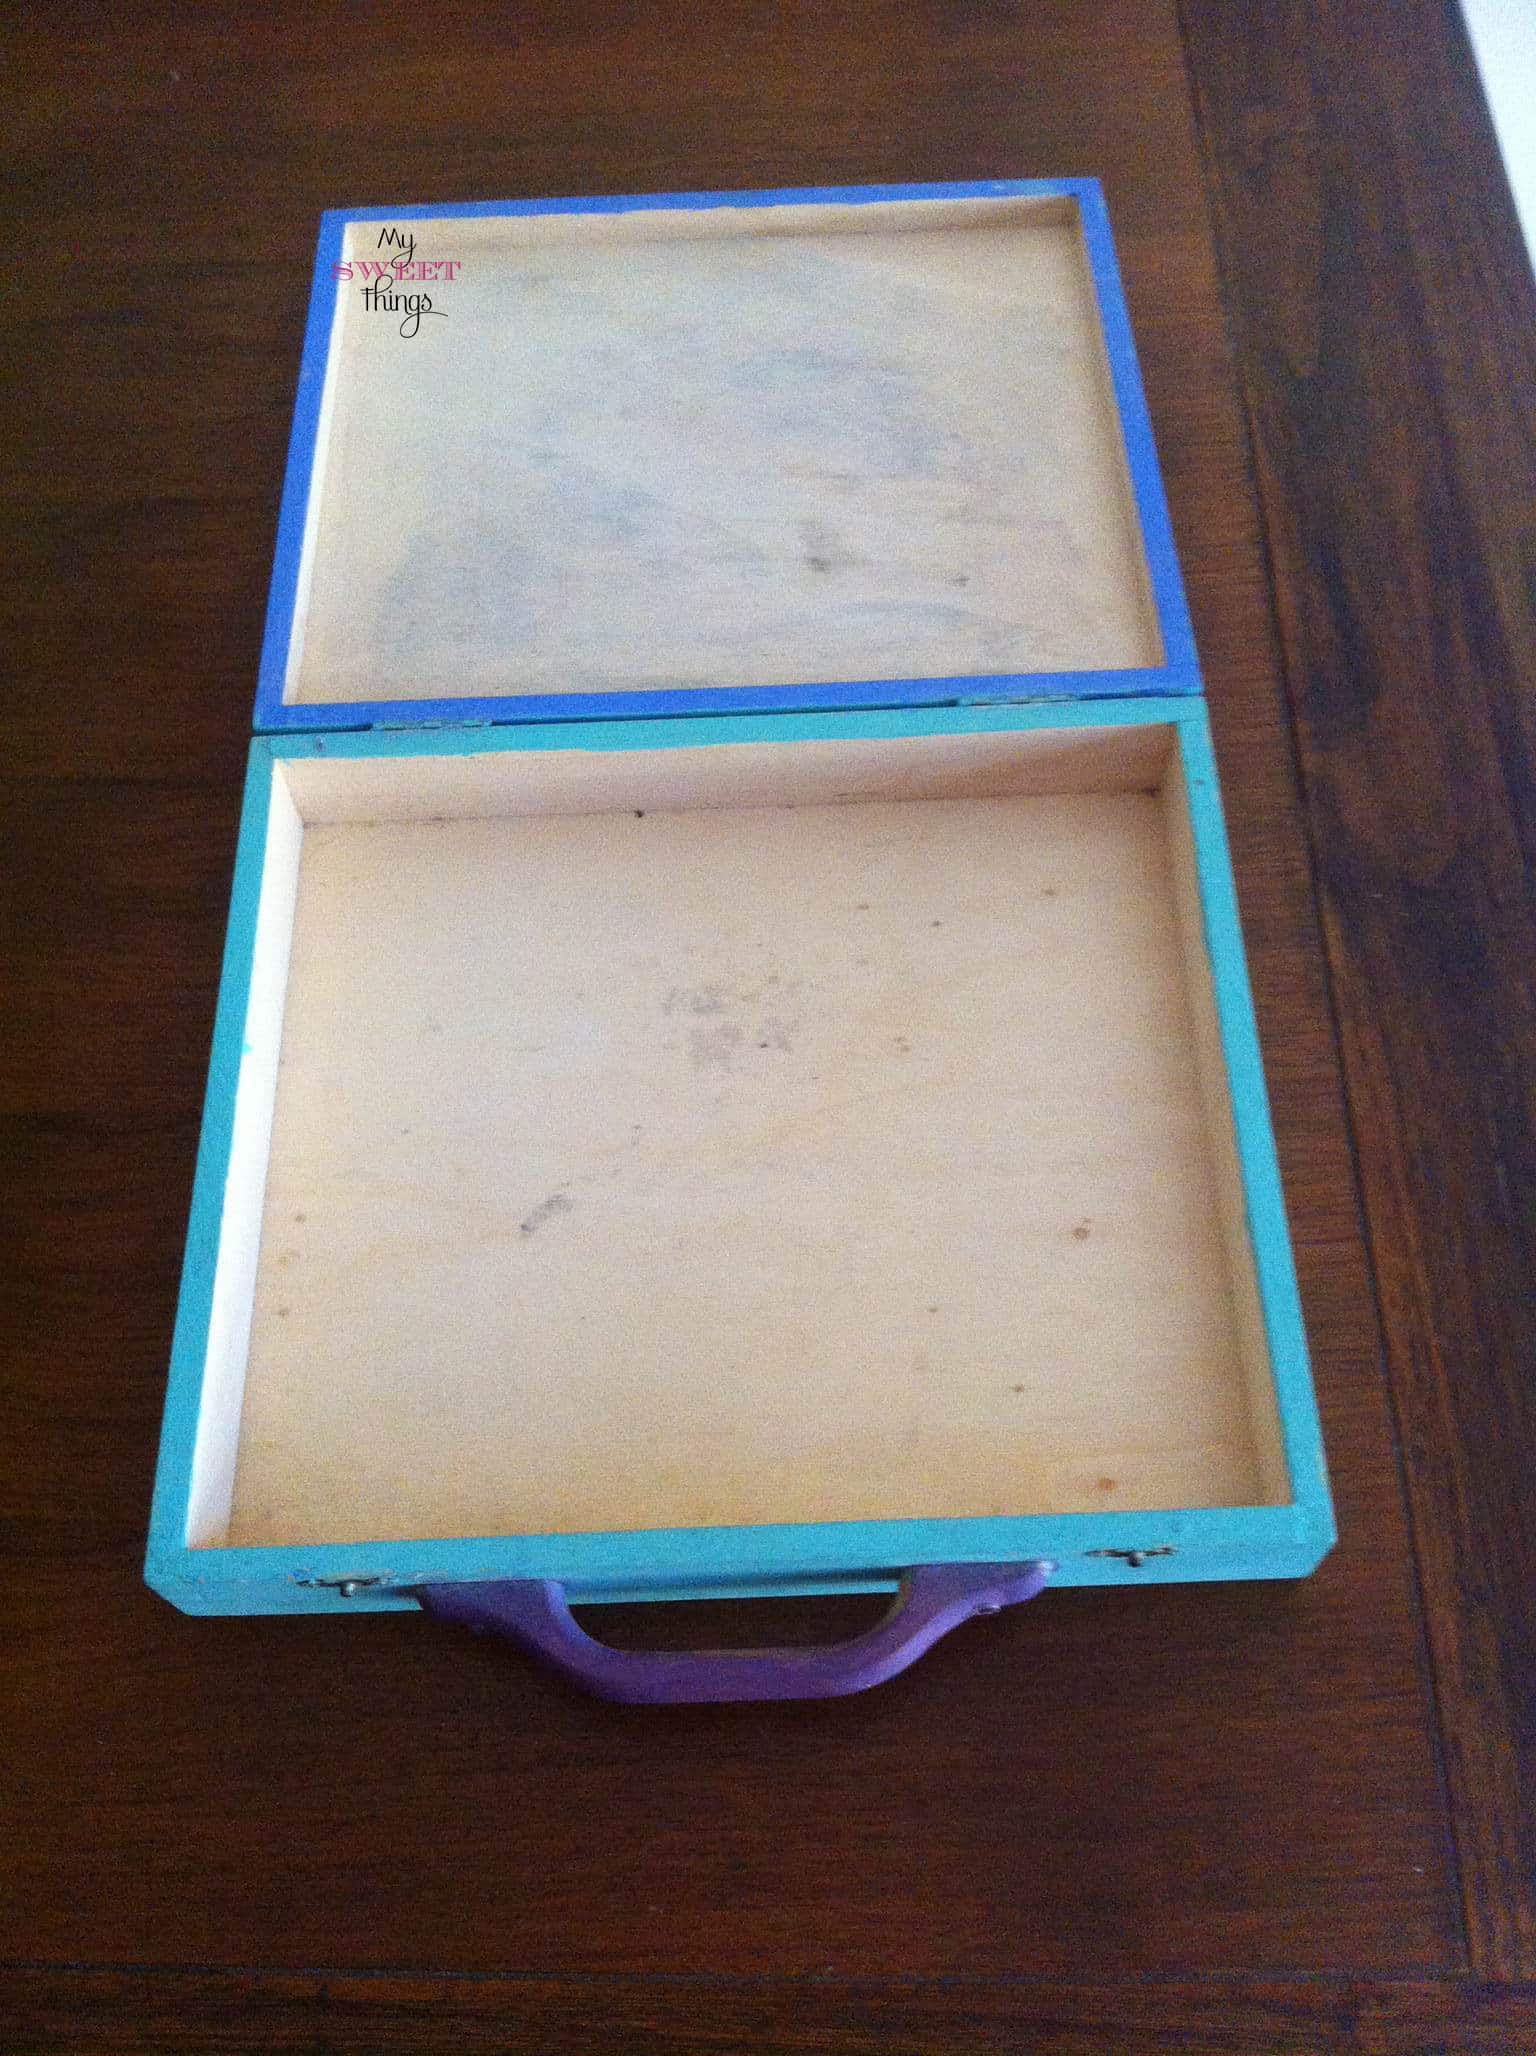 Frozen box and notepad